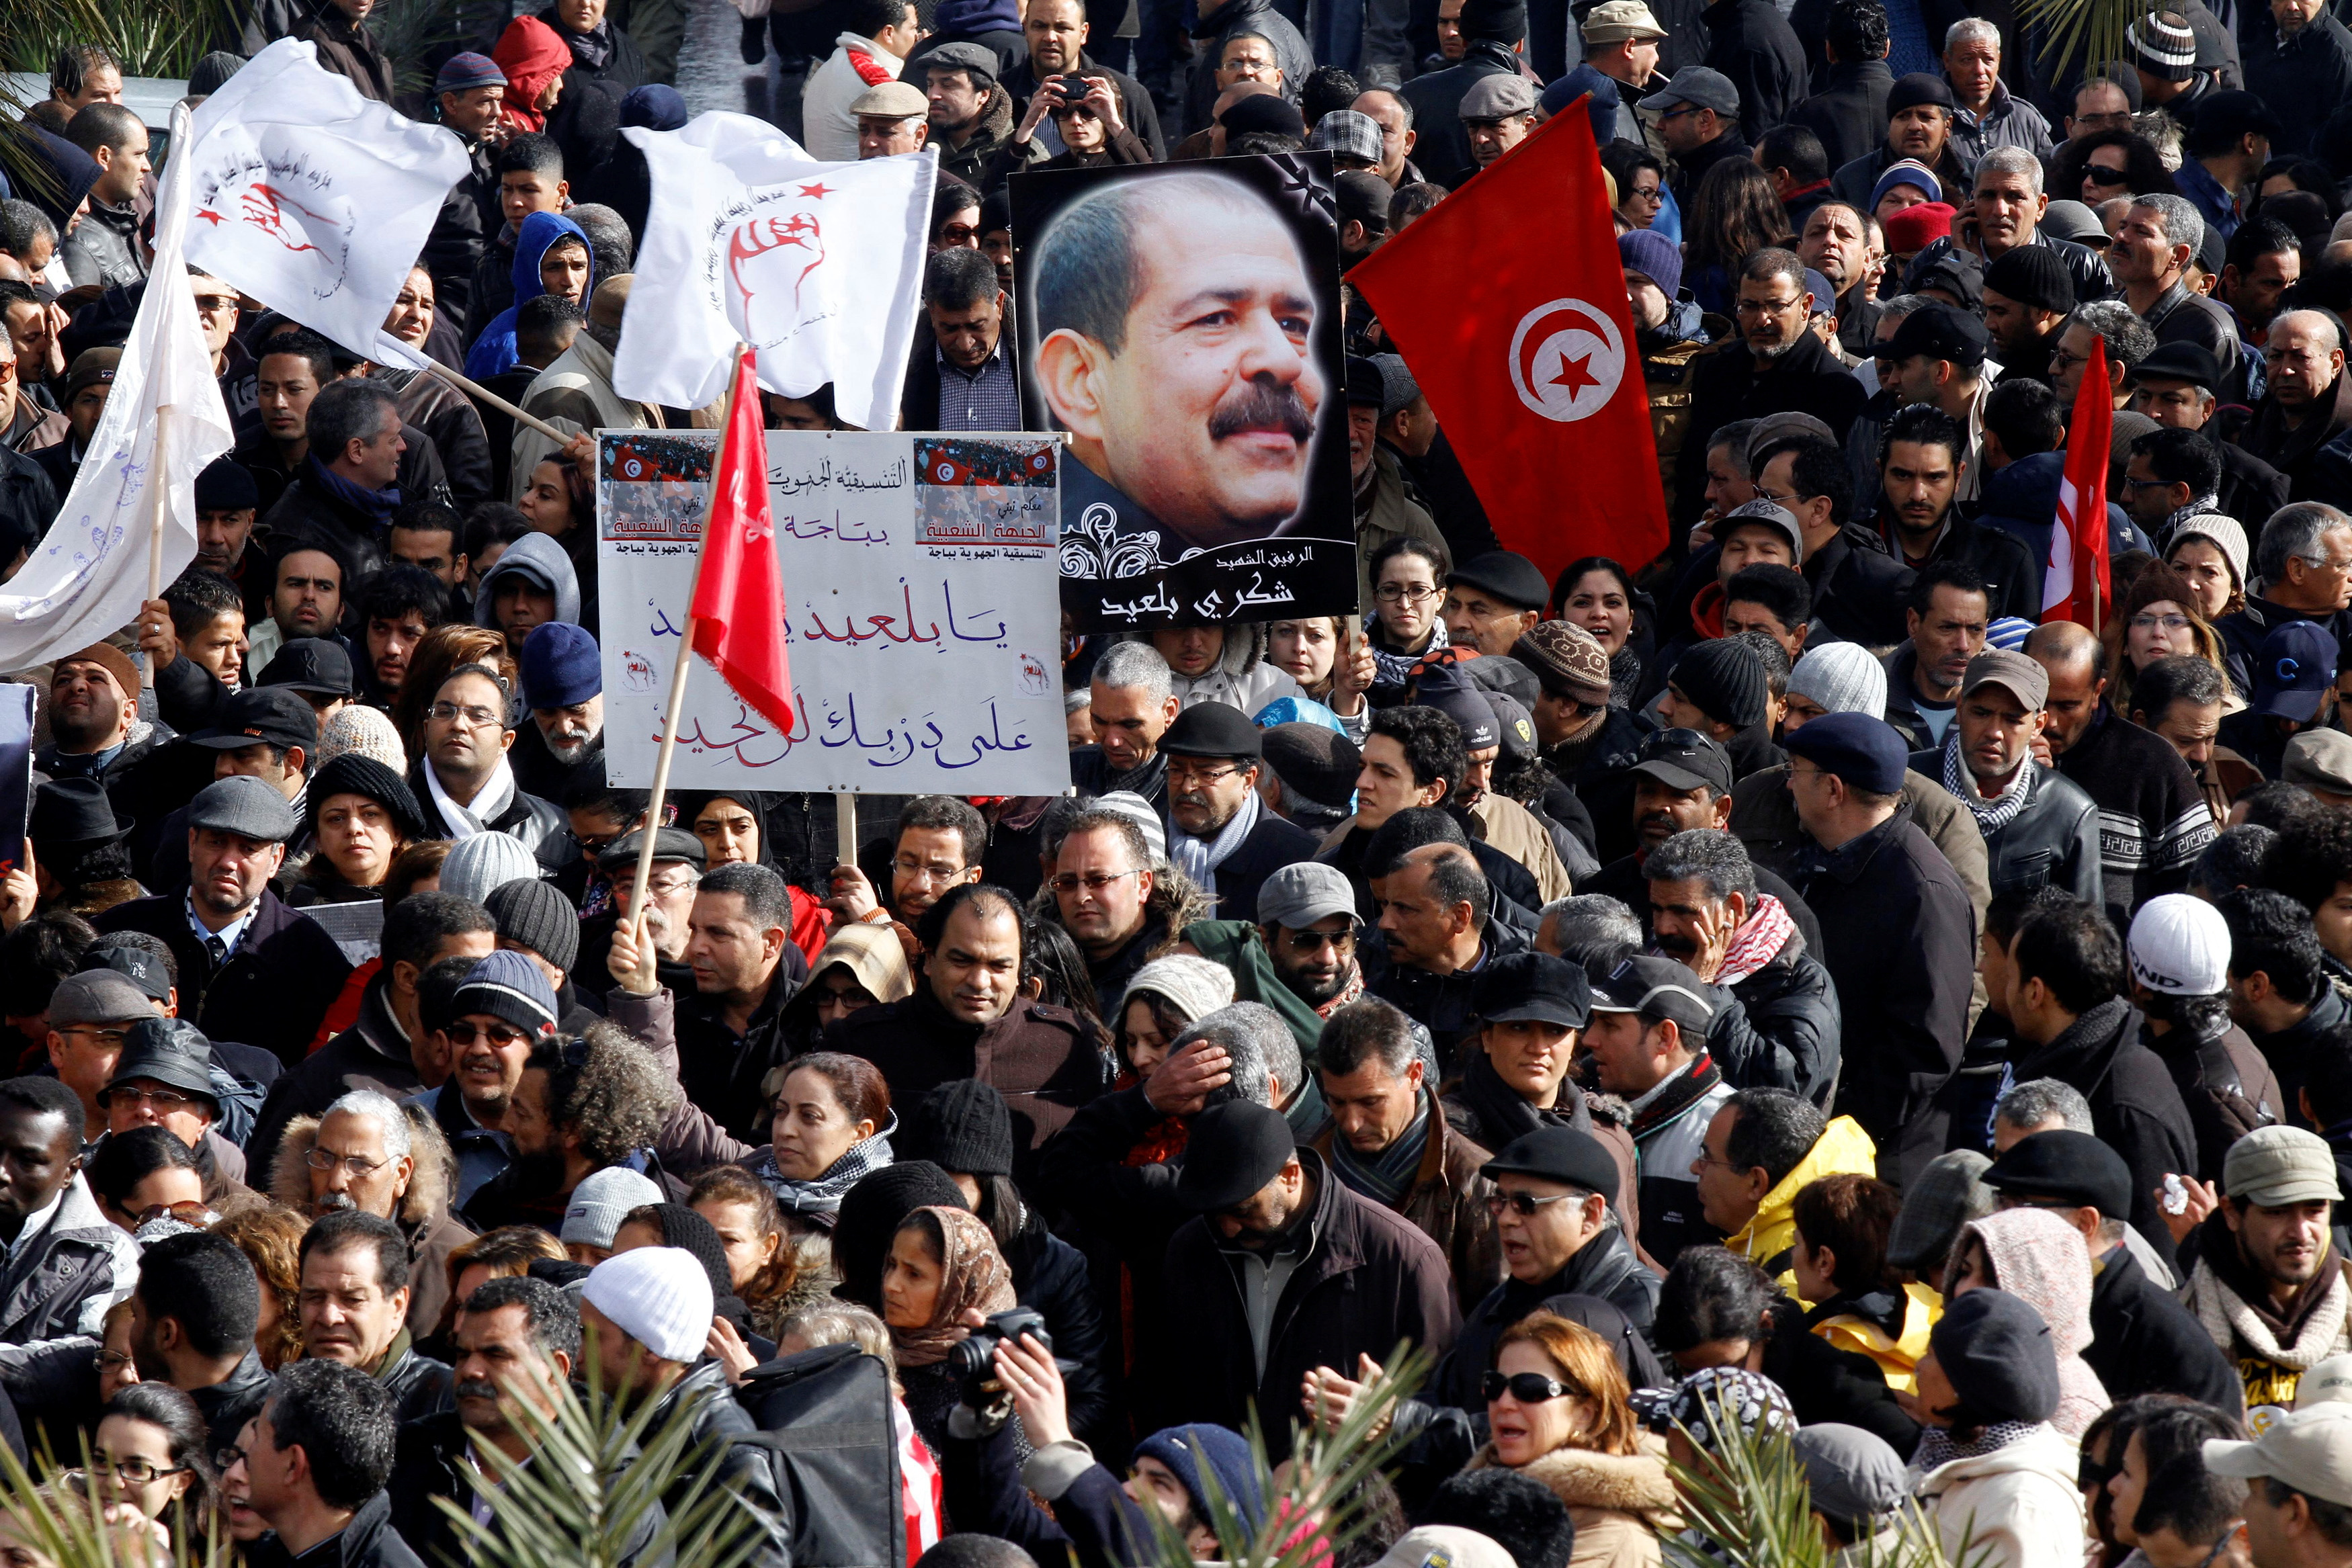 Tunisians hold a placard with an image of the late secular opposition leader Chokri Belaid during his funeral procession in the Jebel Jelloud district in Tunis